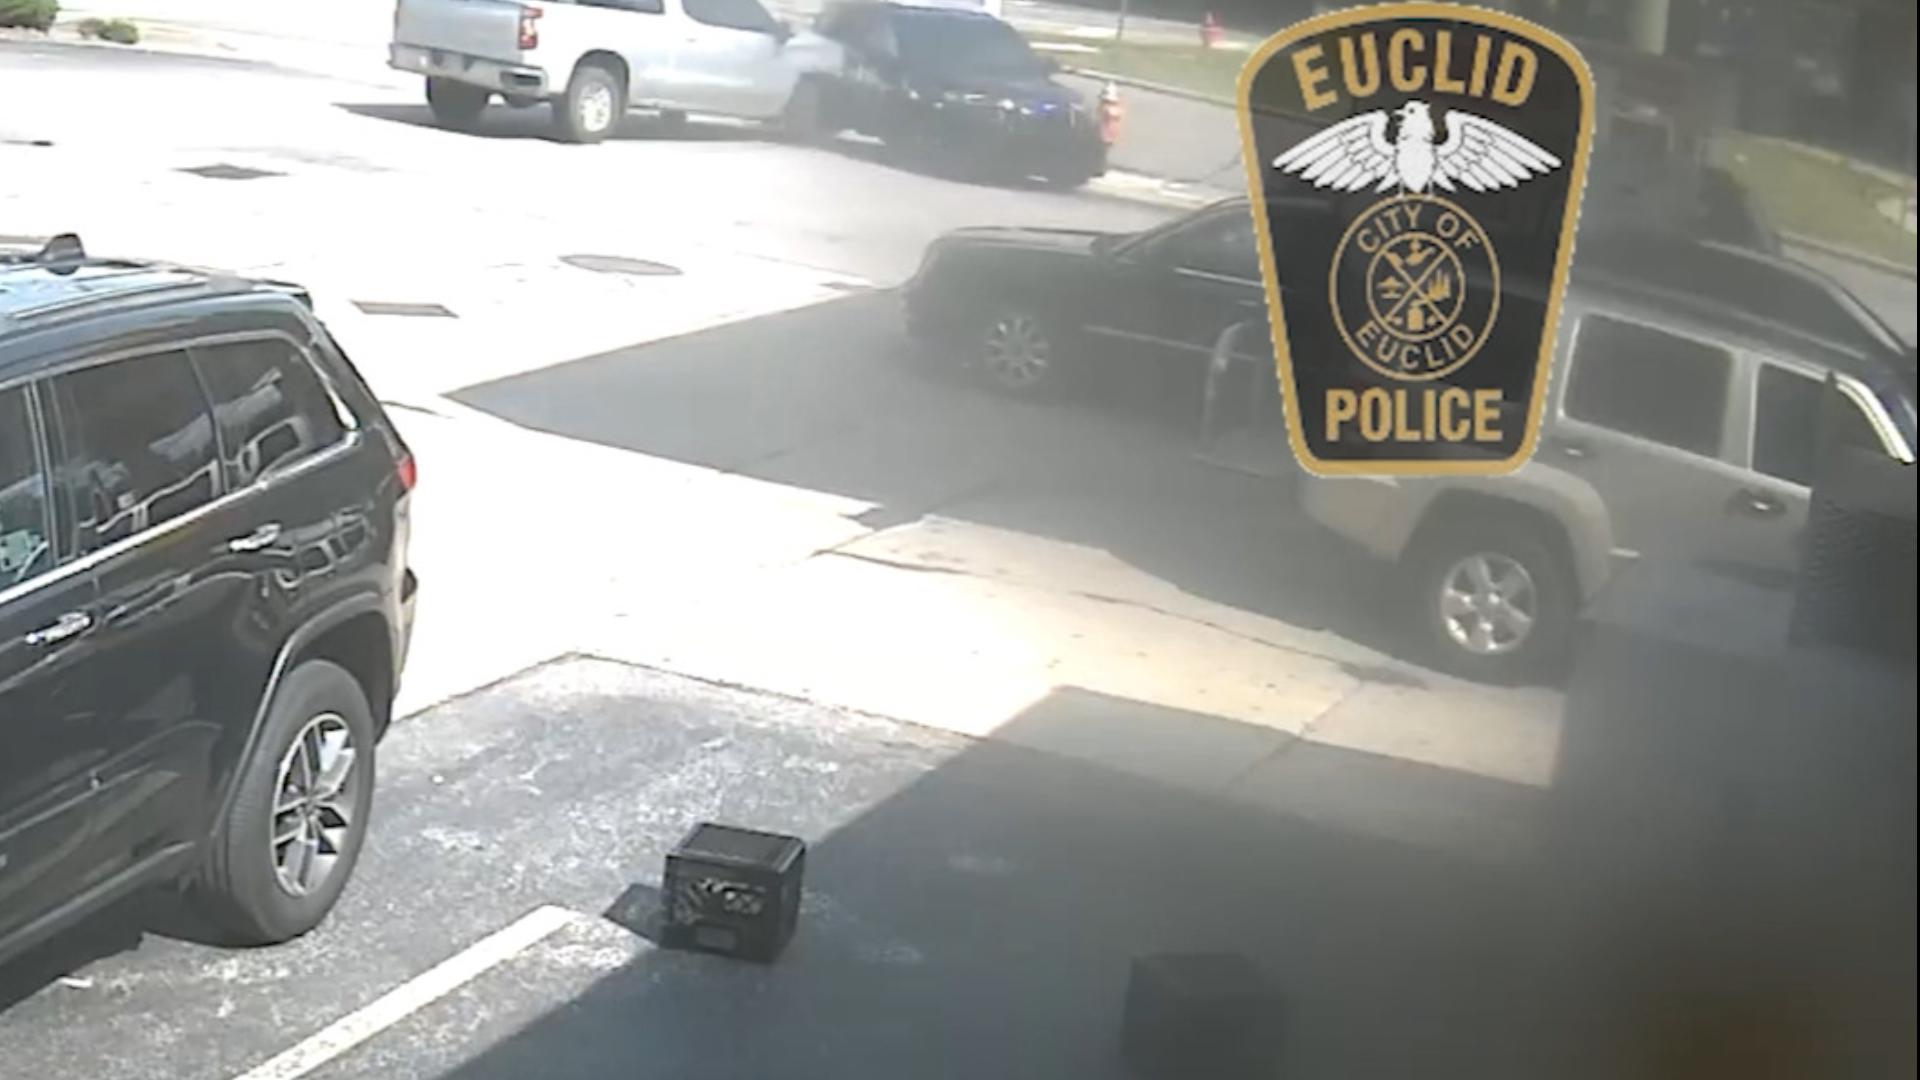 Euclid police also recovered two firearms from the suspect's vehicle.